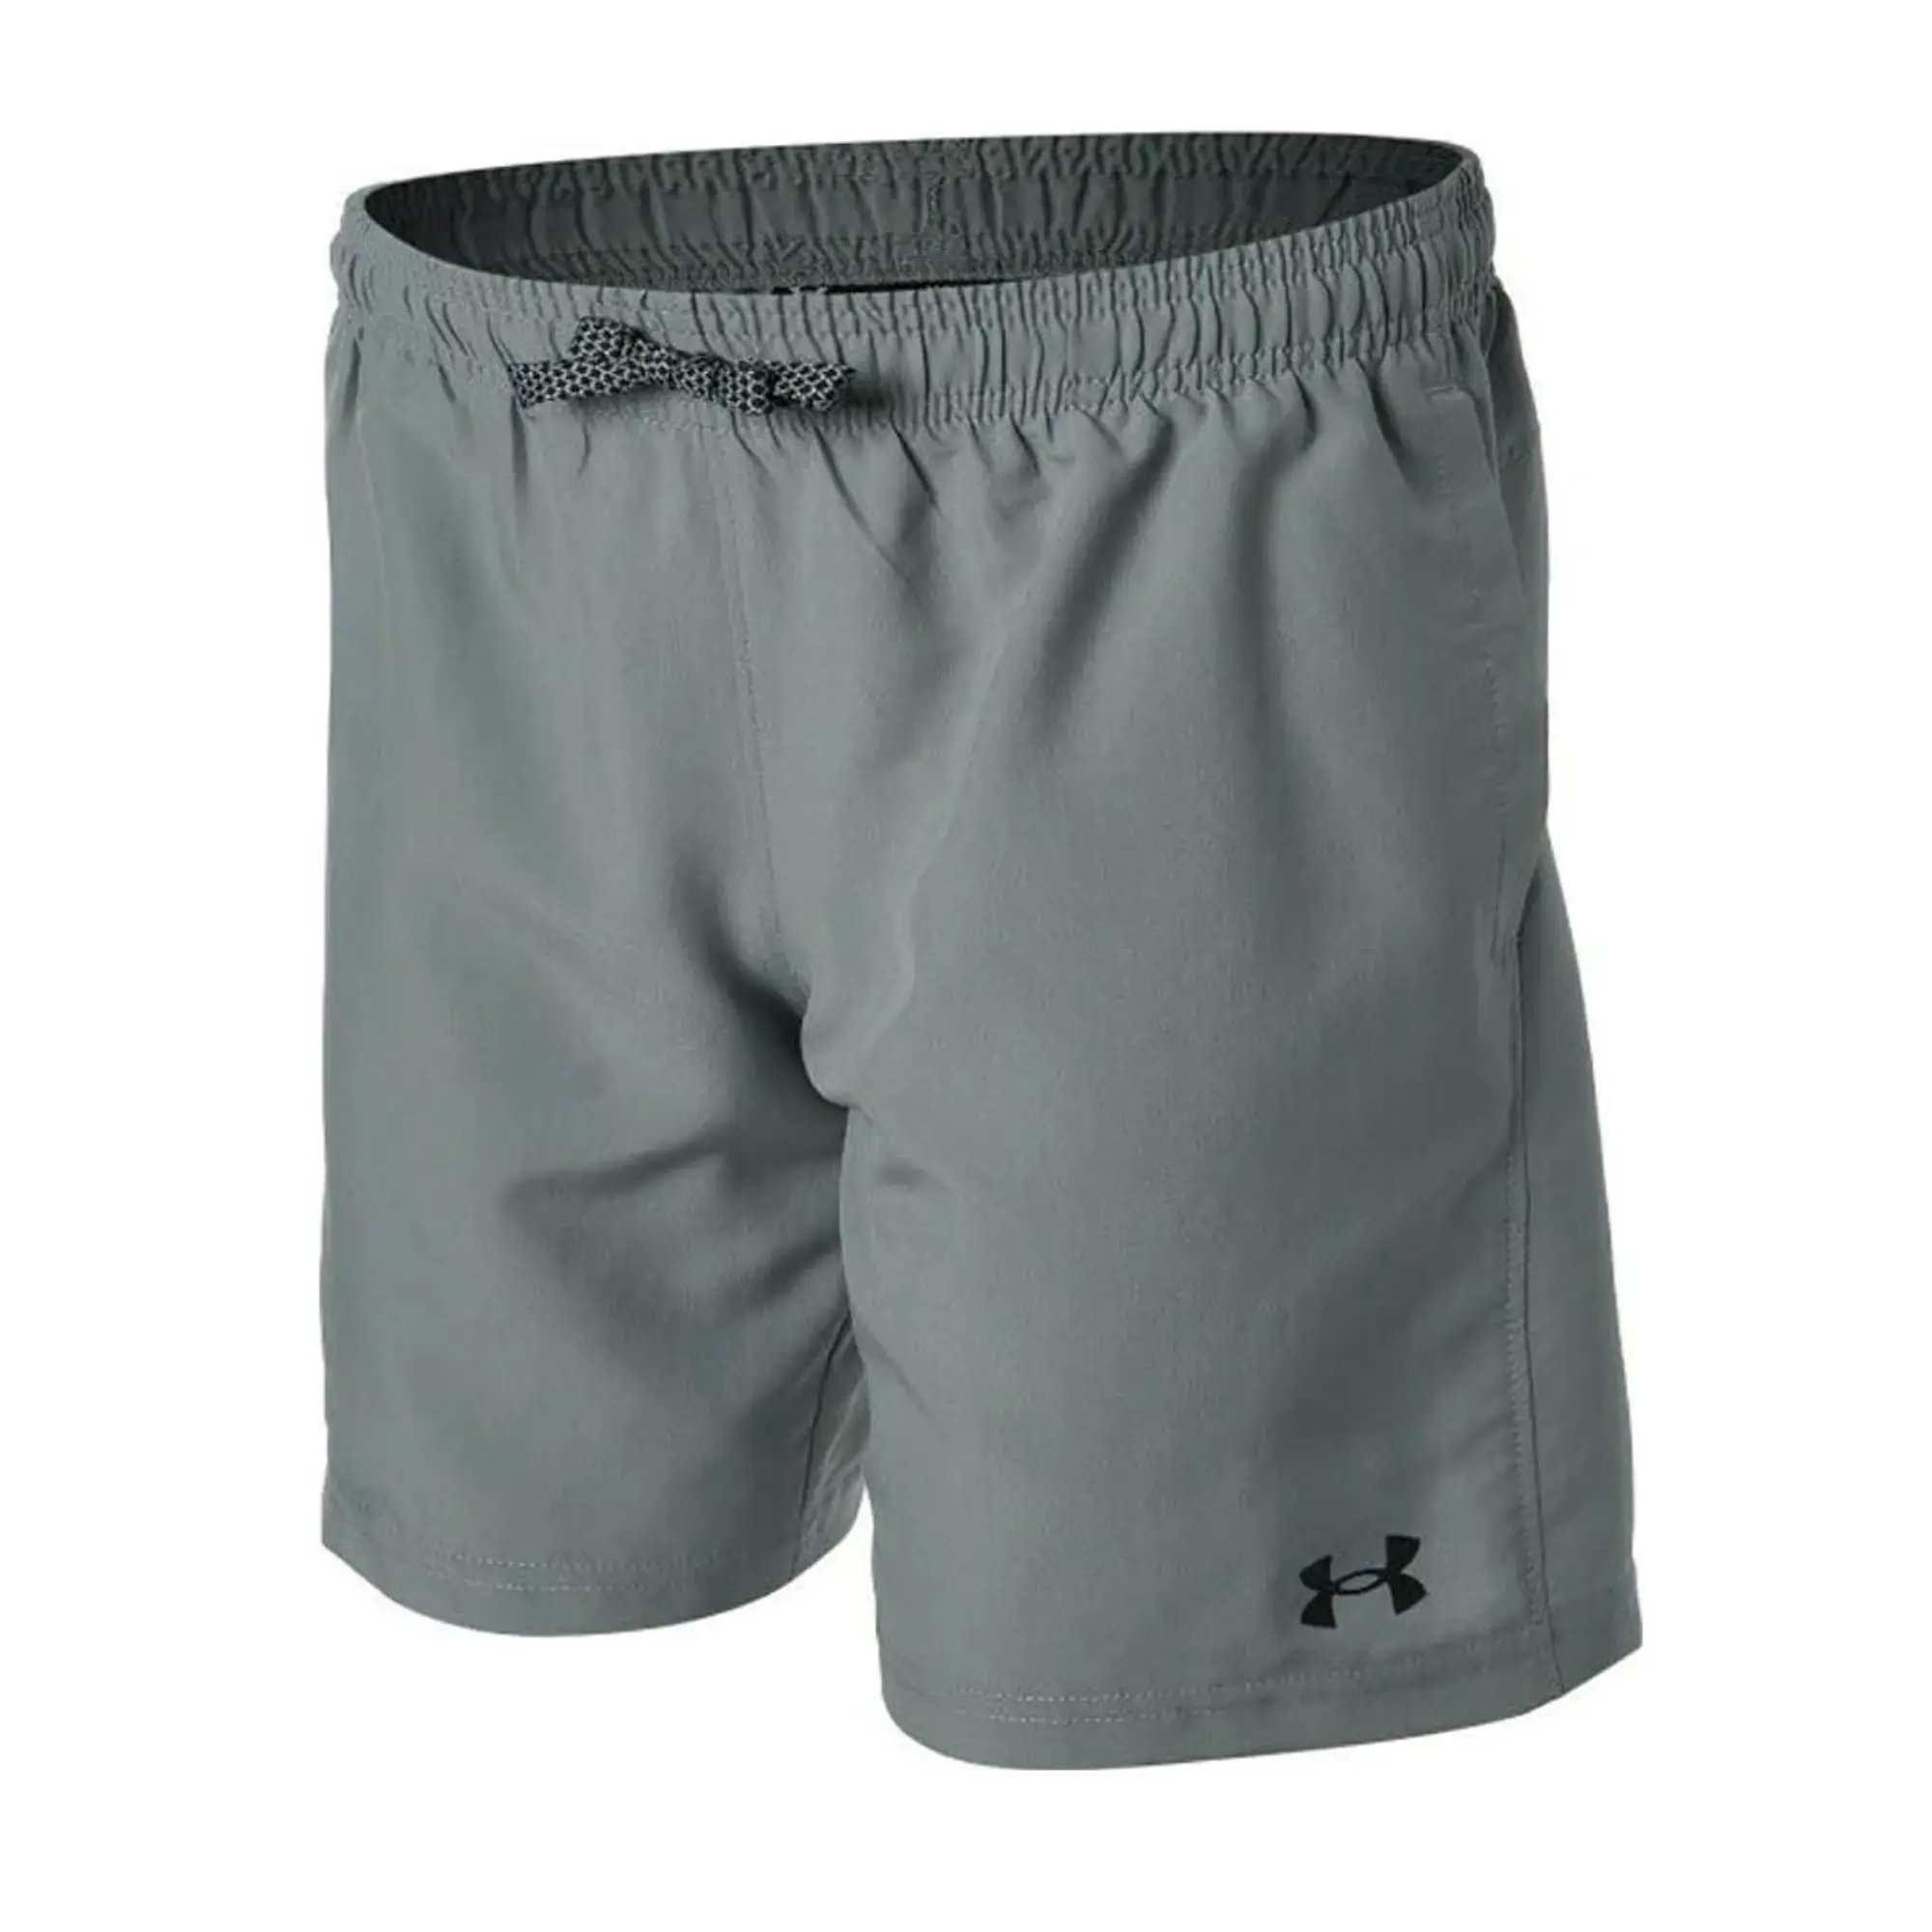 Under Armour Boys Boy's Junior Woven Graphic Shorts in Grey